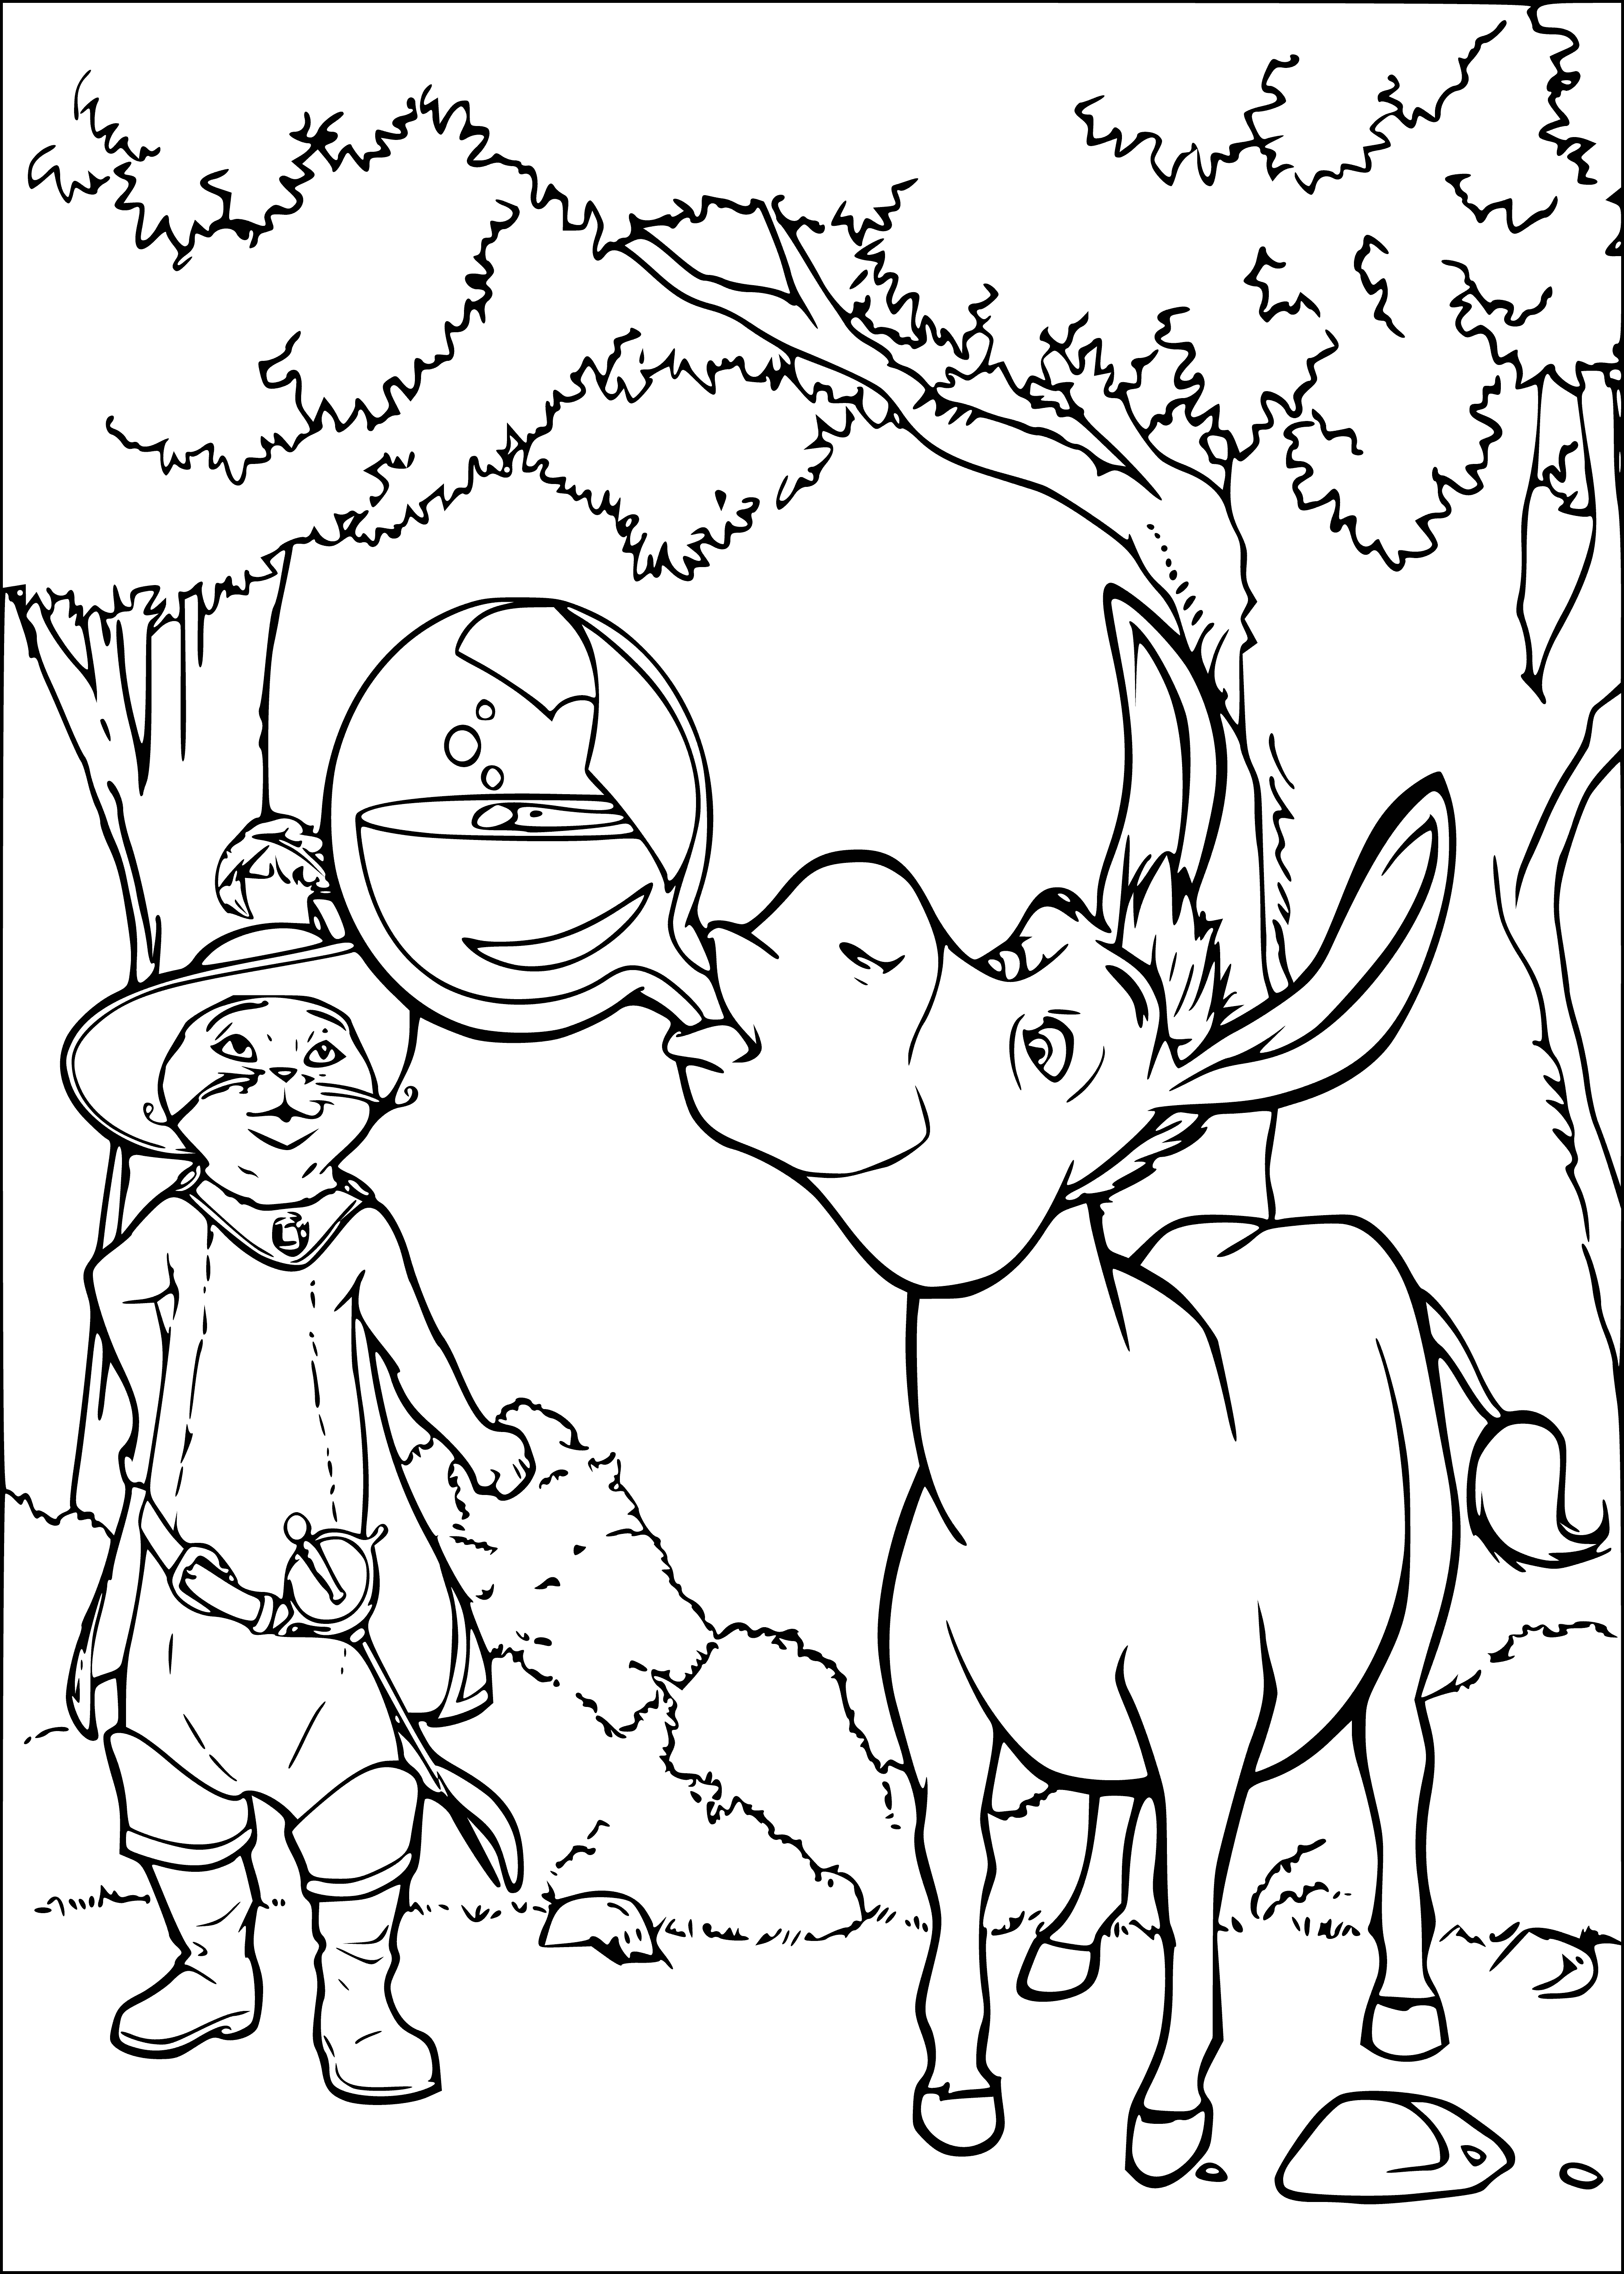 coloring page: Shrek & Donkey stand side-by-side, smiling & looking at each other & the camera.